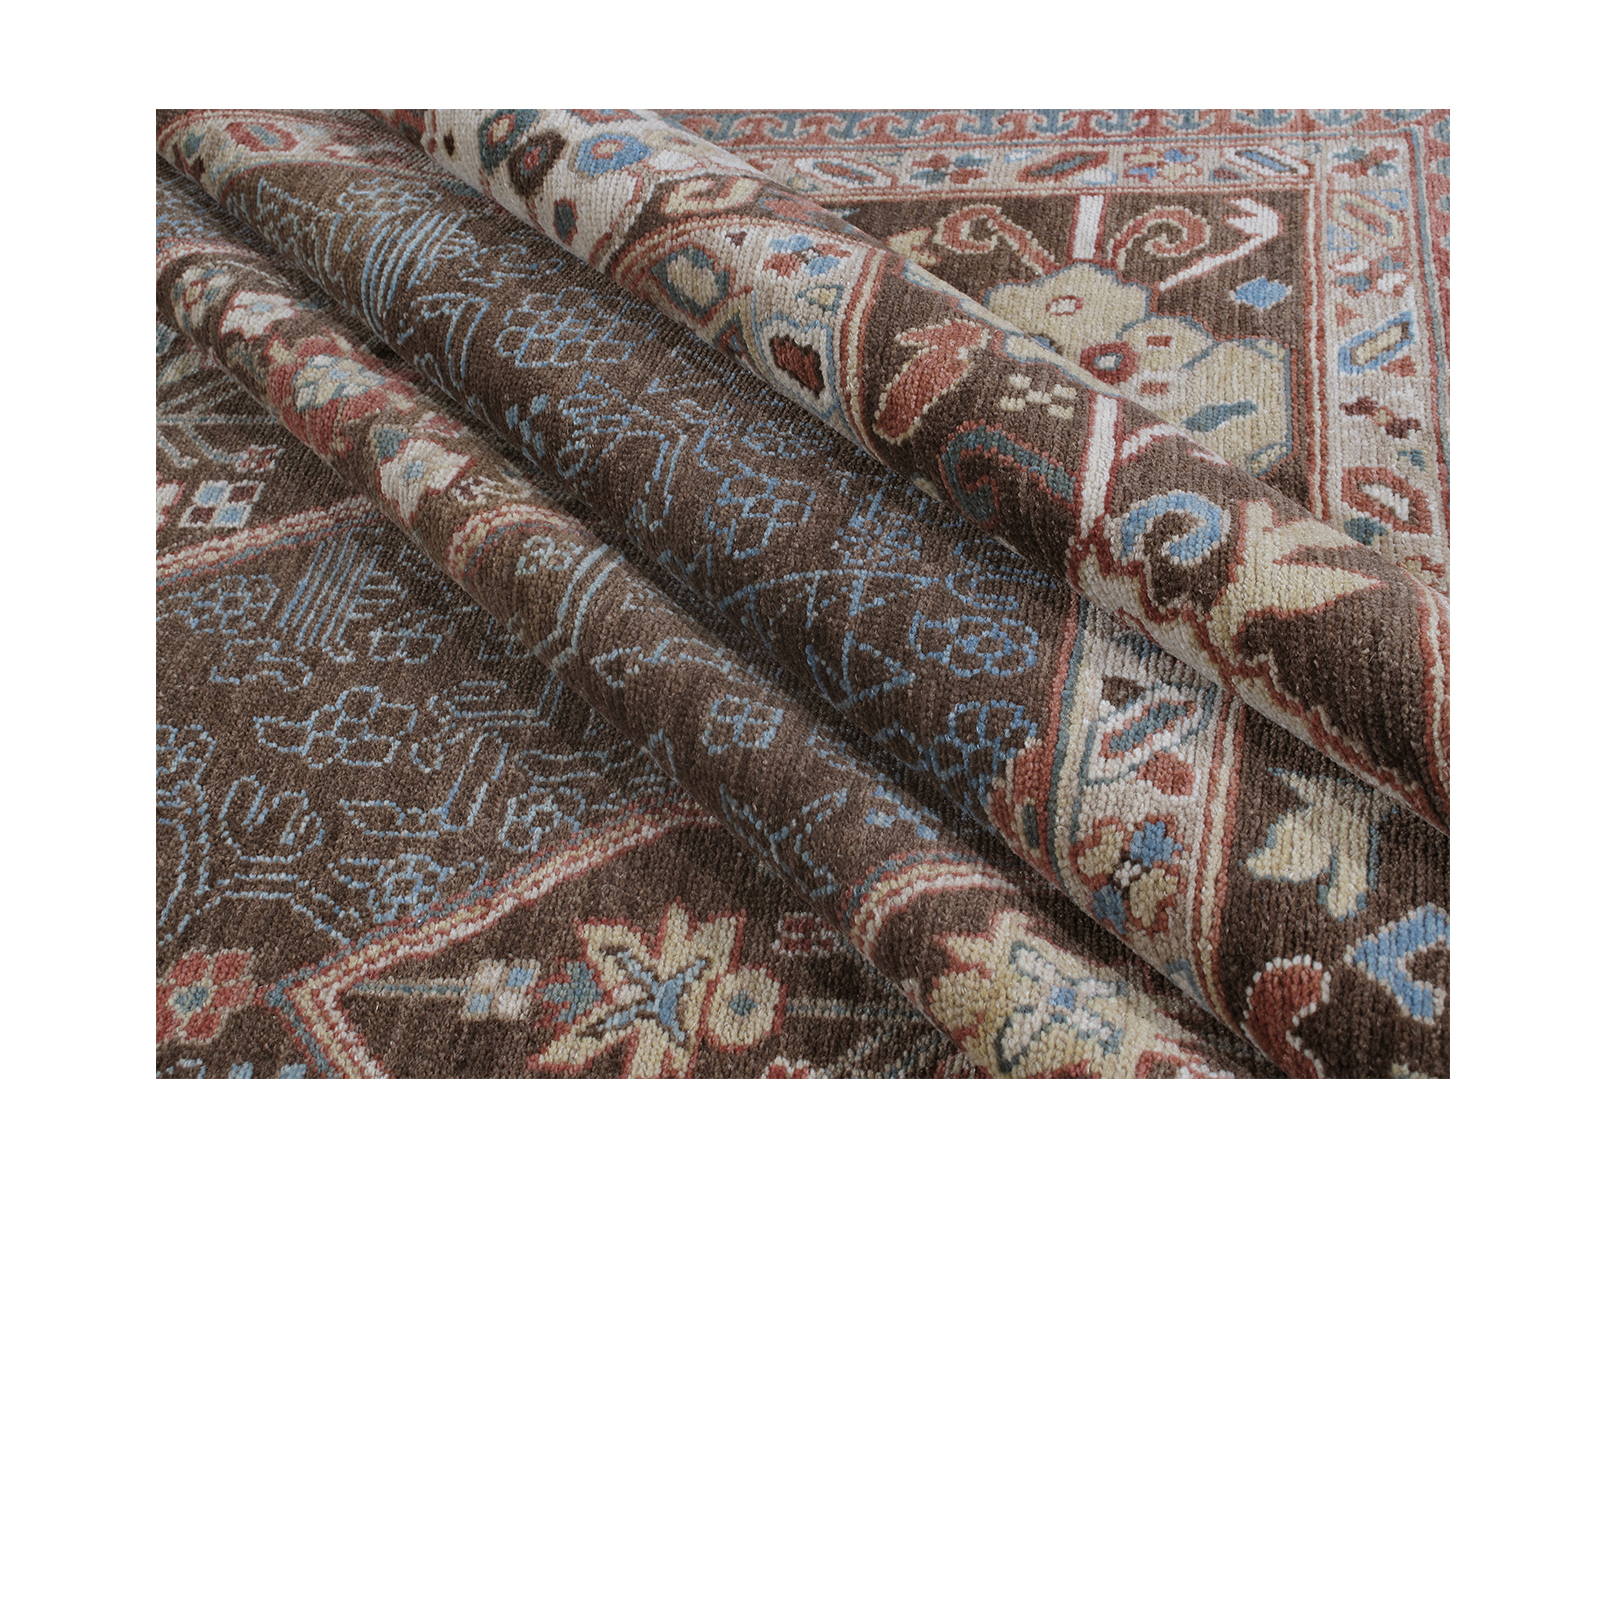 This Kurdish rug is crafted with durable and all natural material.